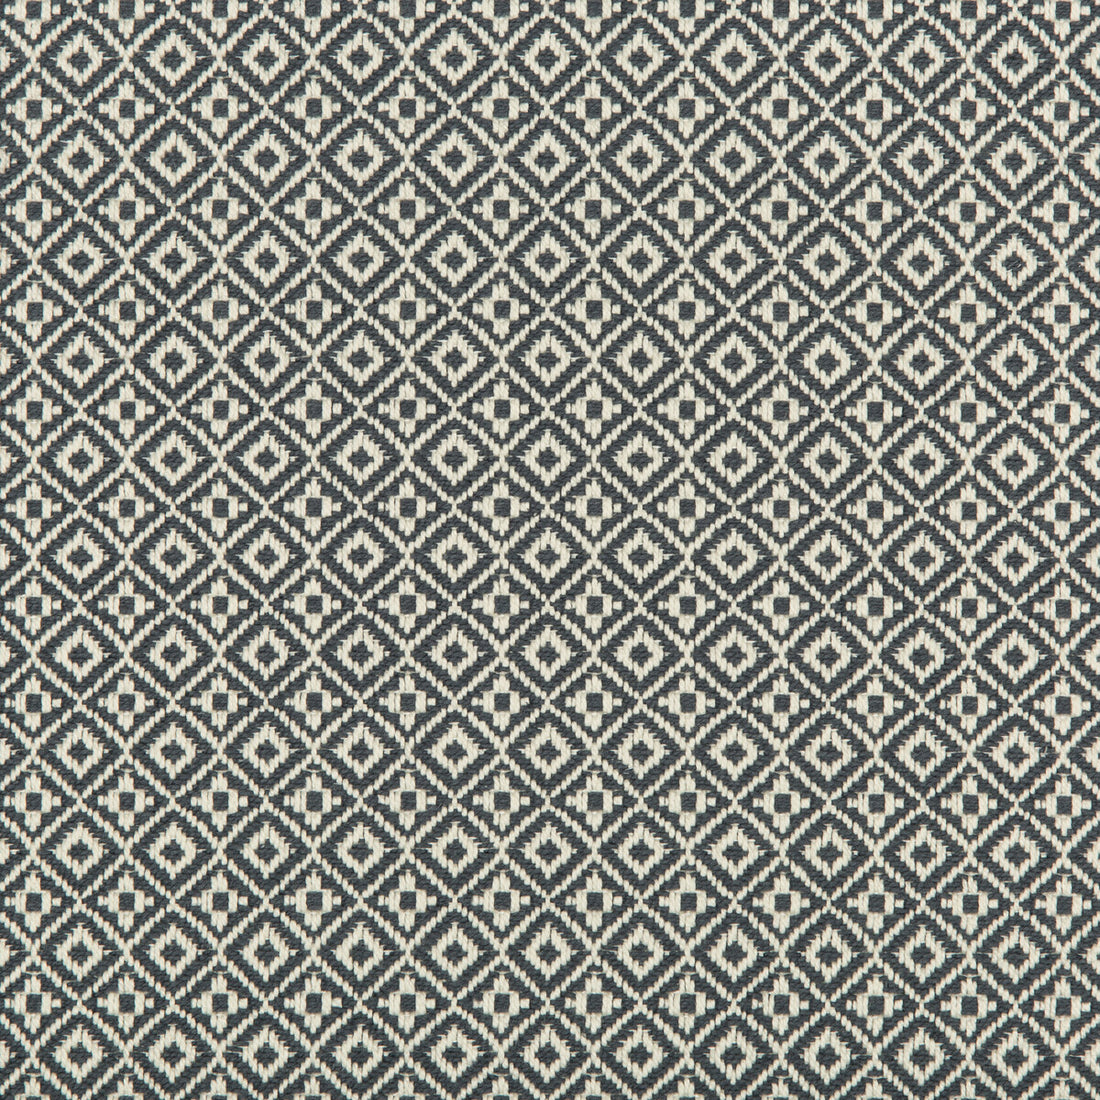 Attribute Grid fabric in denim color - pattern 35403.21.0 - by Kravet Design in the Nate Berkus Well-Traveled collection